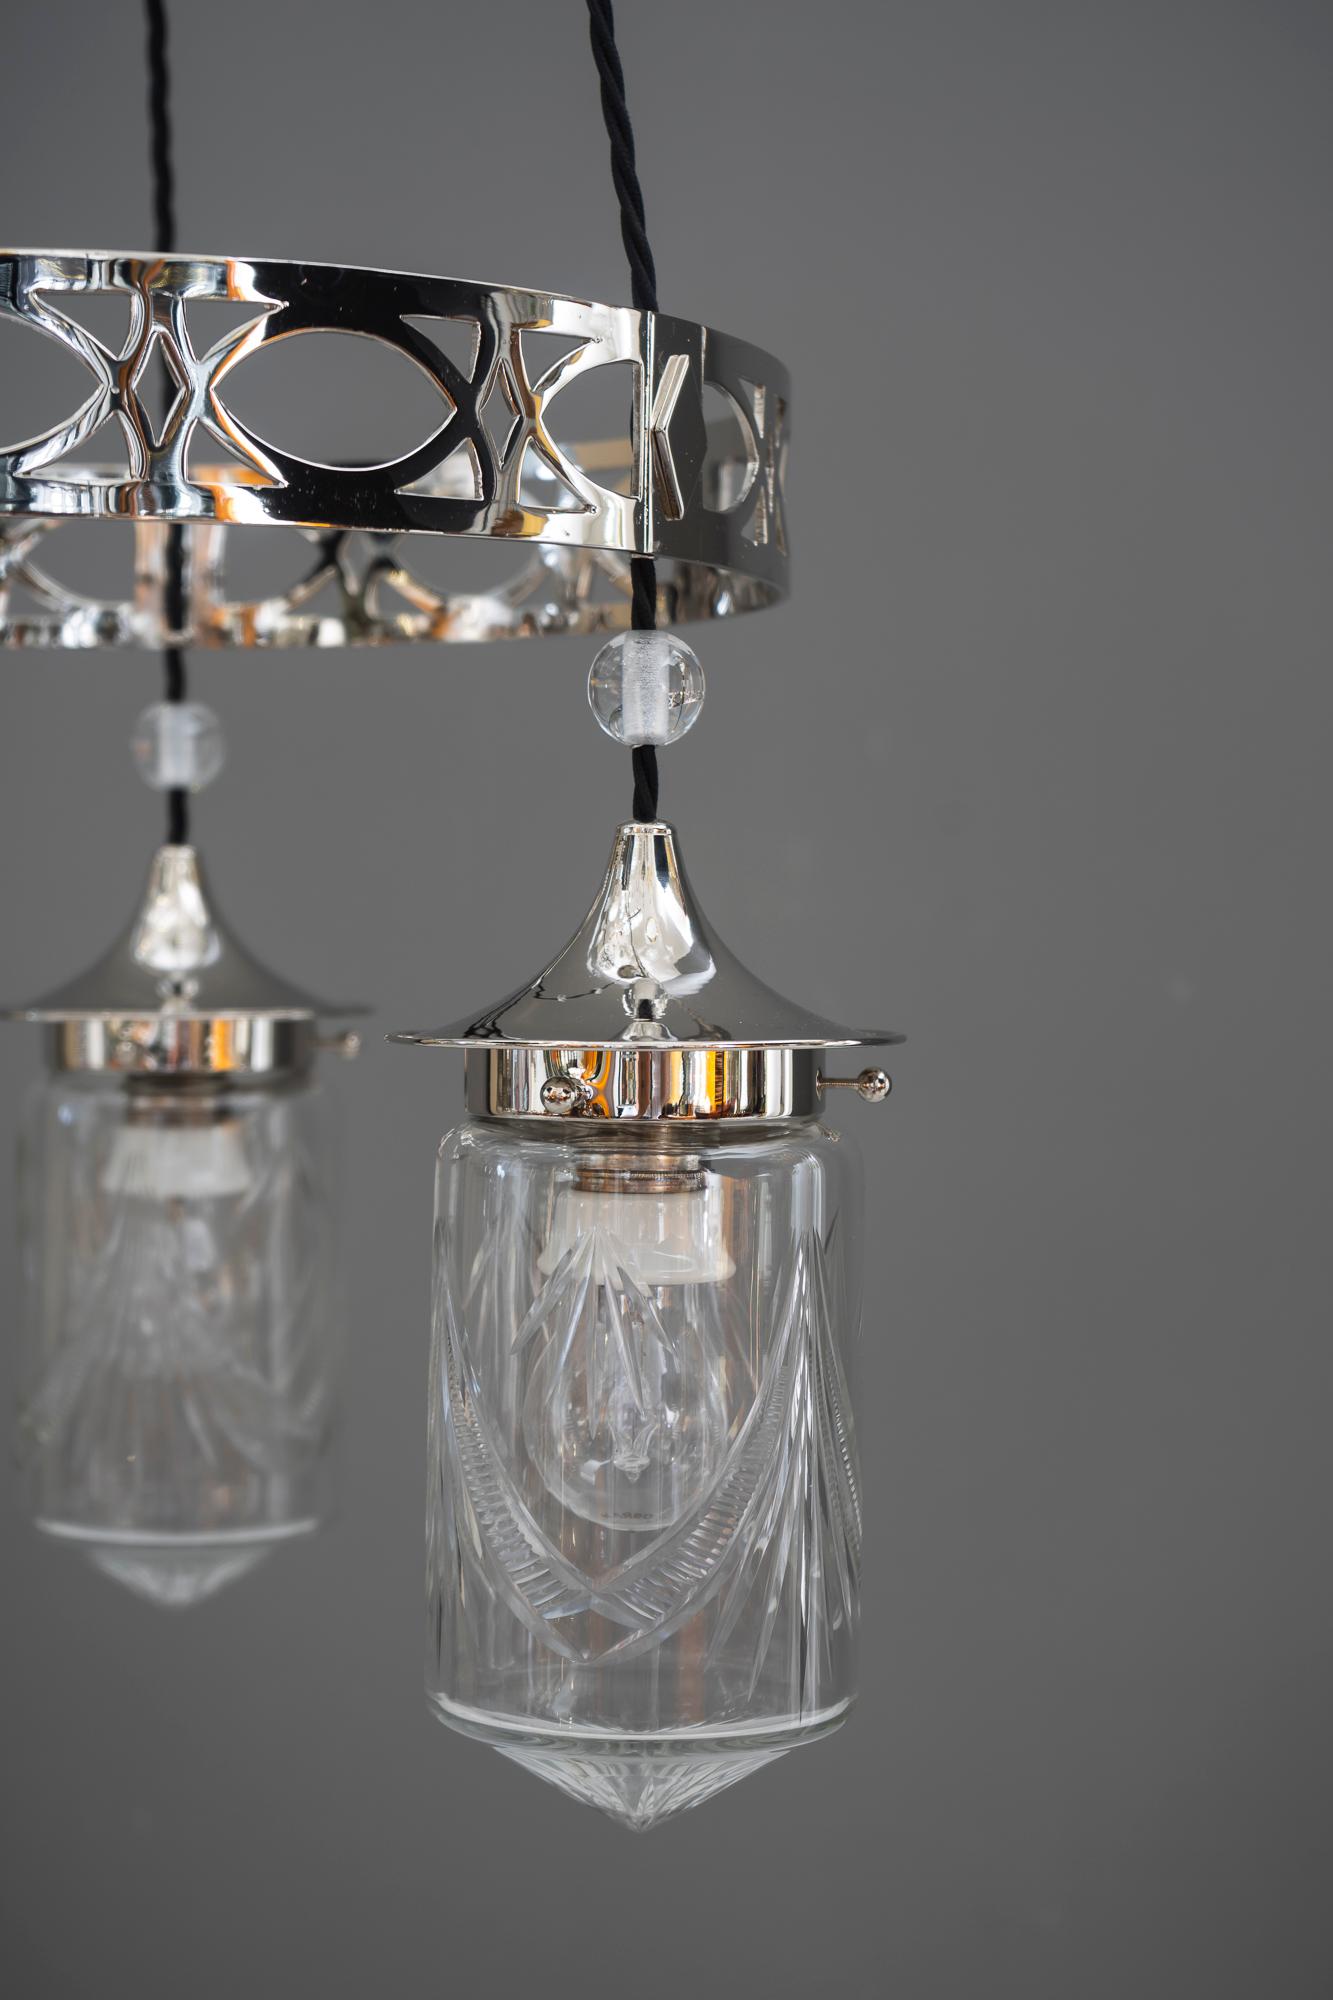 Nickel-Plated Art Deco Chandelier with Original Cut-Glasses, circa 1920s For Sale 1